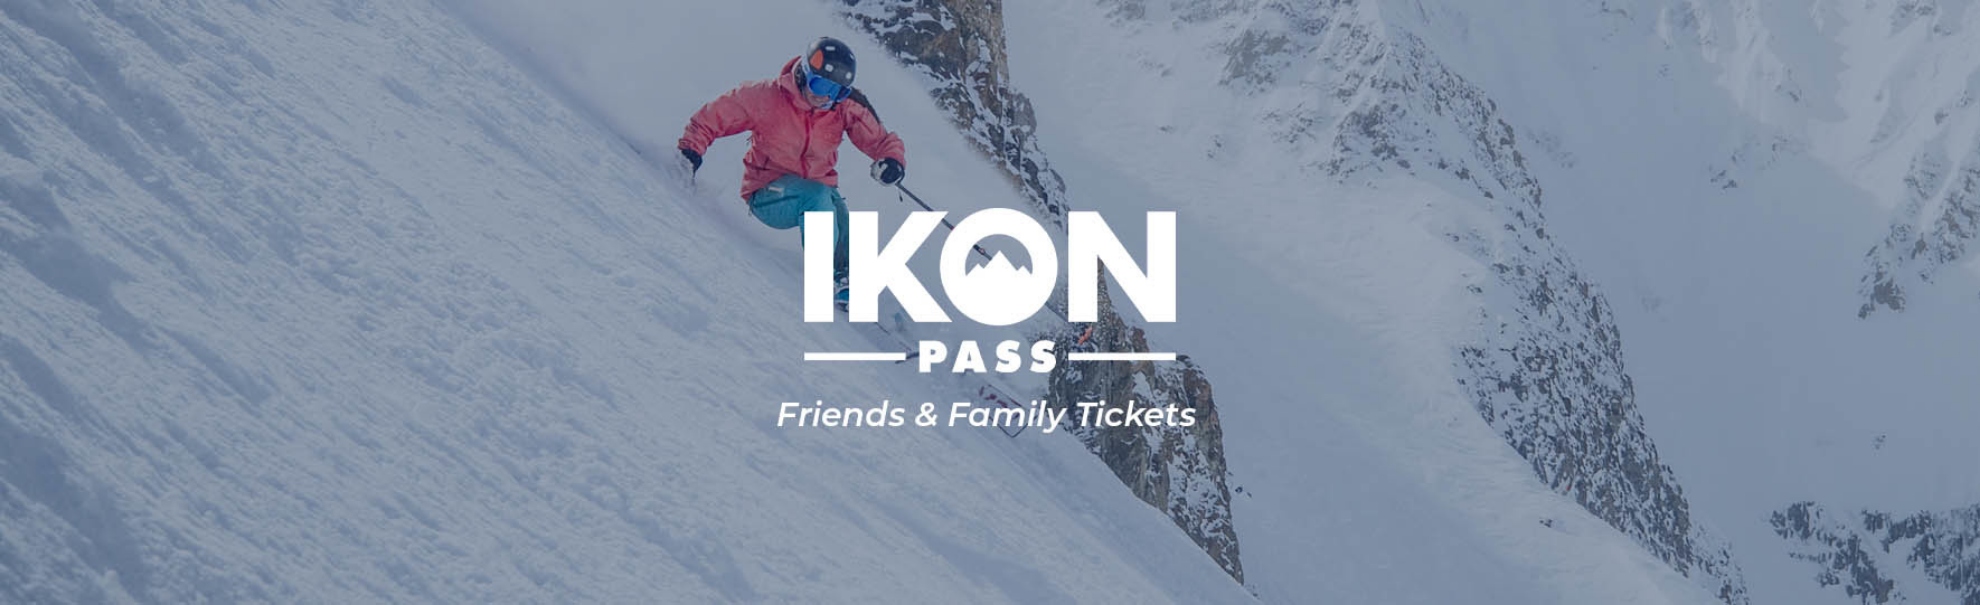 Picture of Ikon Friends & Family Ticket